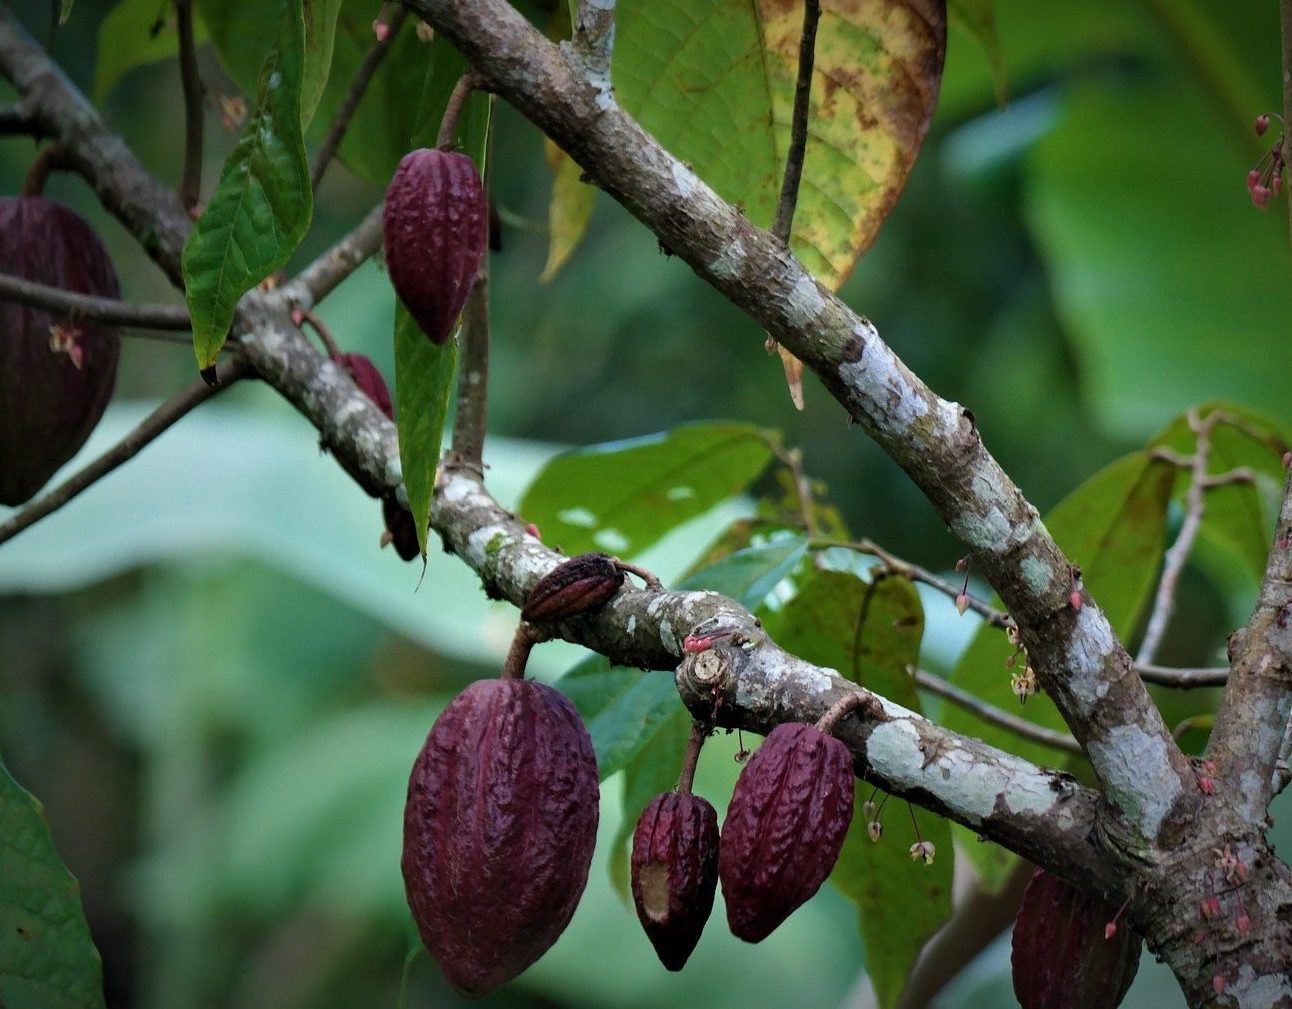 Cocoa beans hanging on a tree